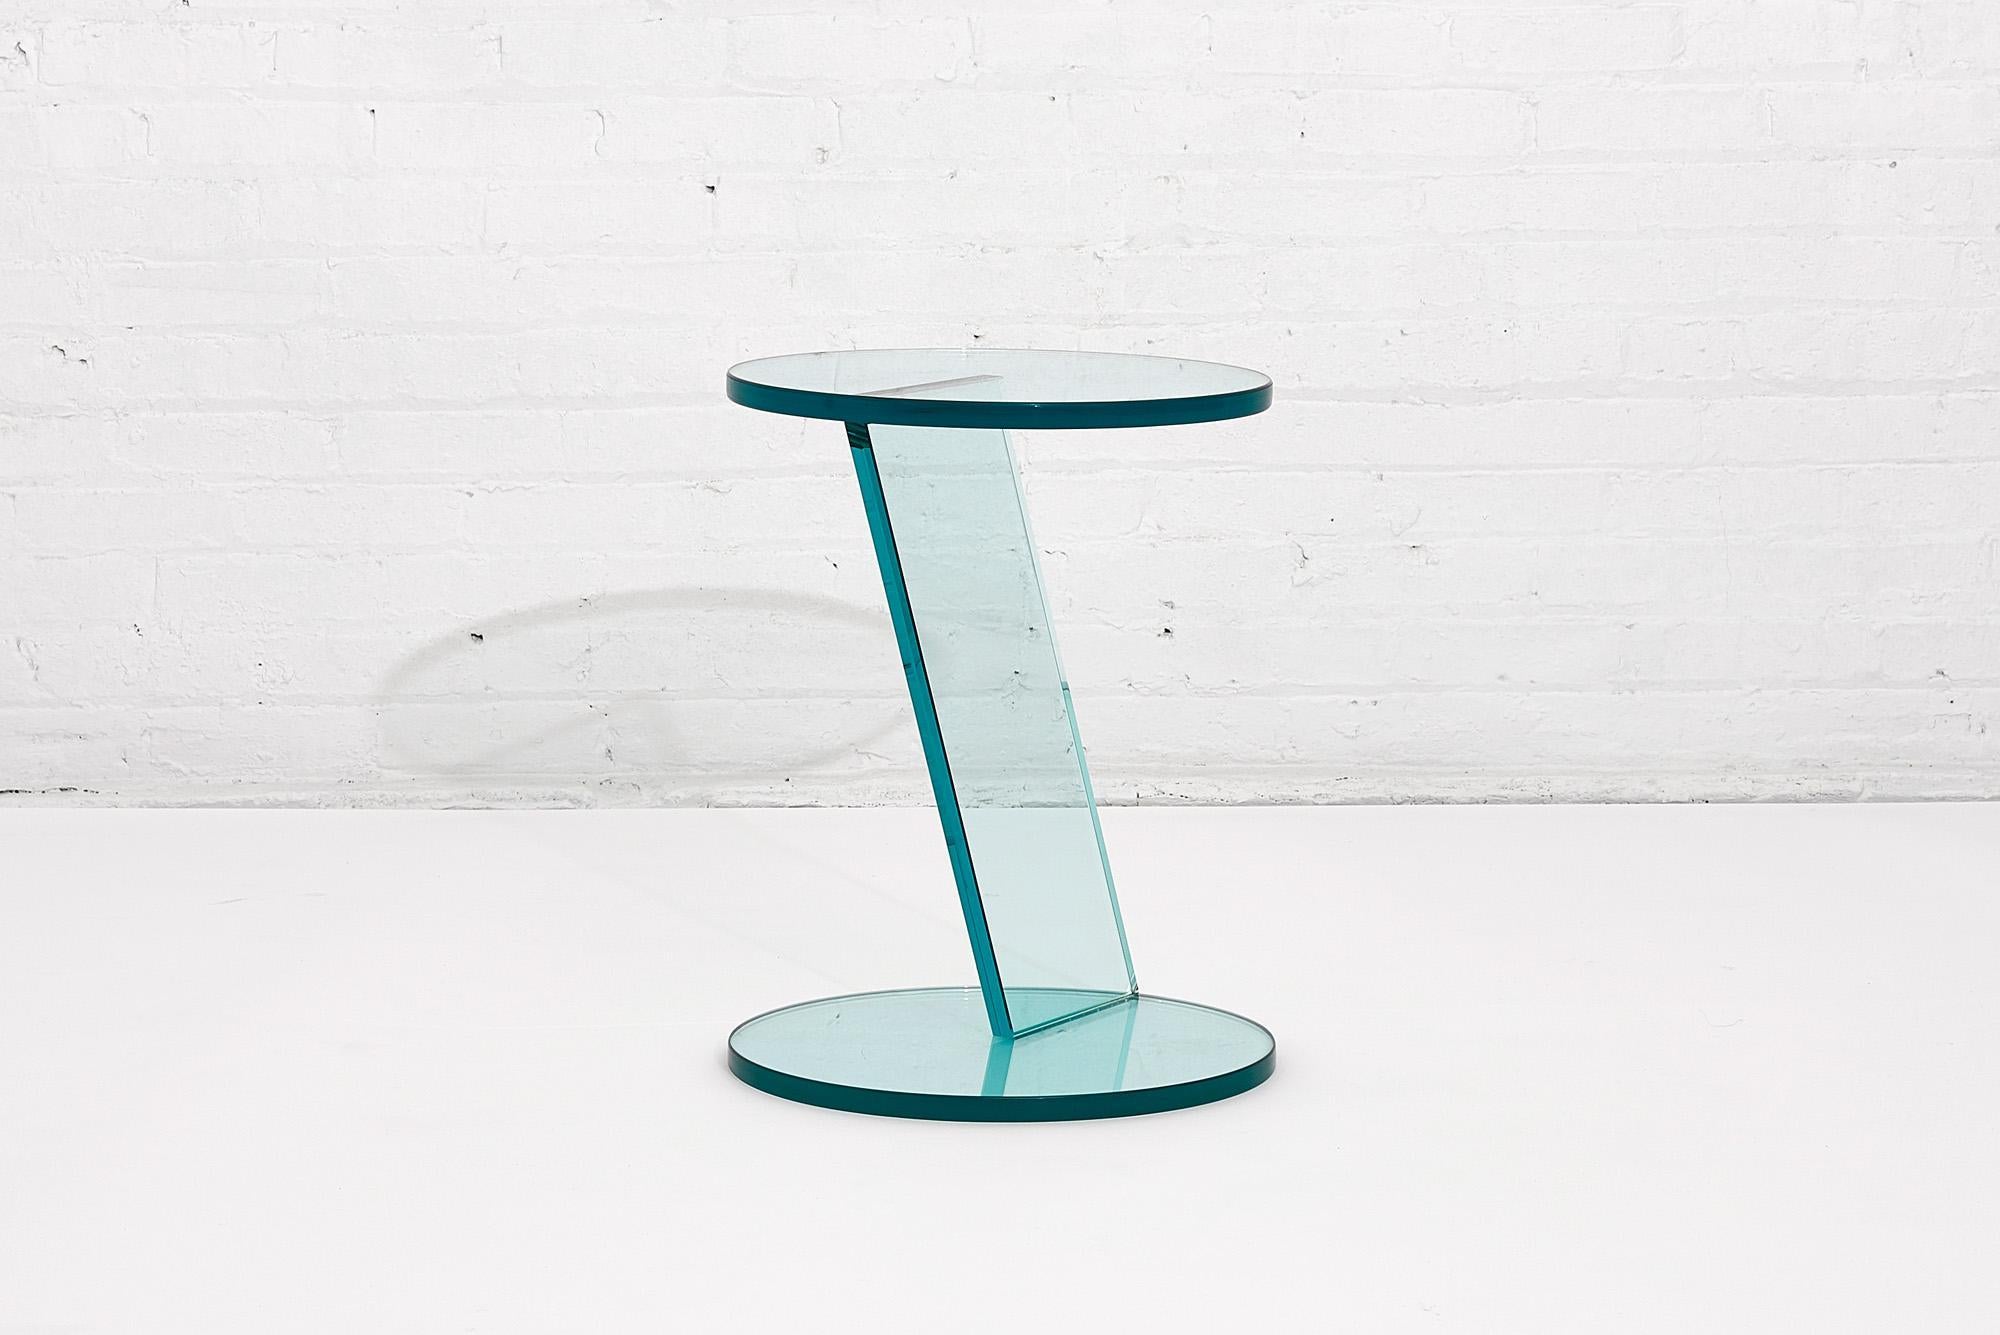 Italian Postmodern glass drink table. A Postmodern style round all glass table with asymmetric design, Italy, circa 1990s.